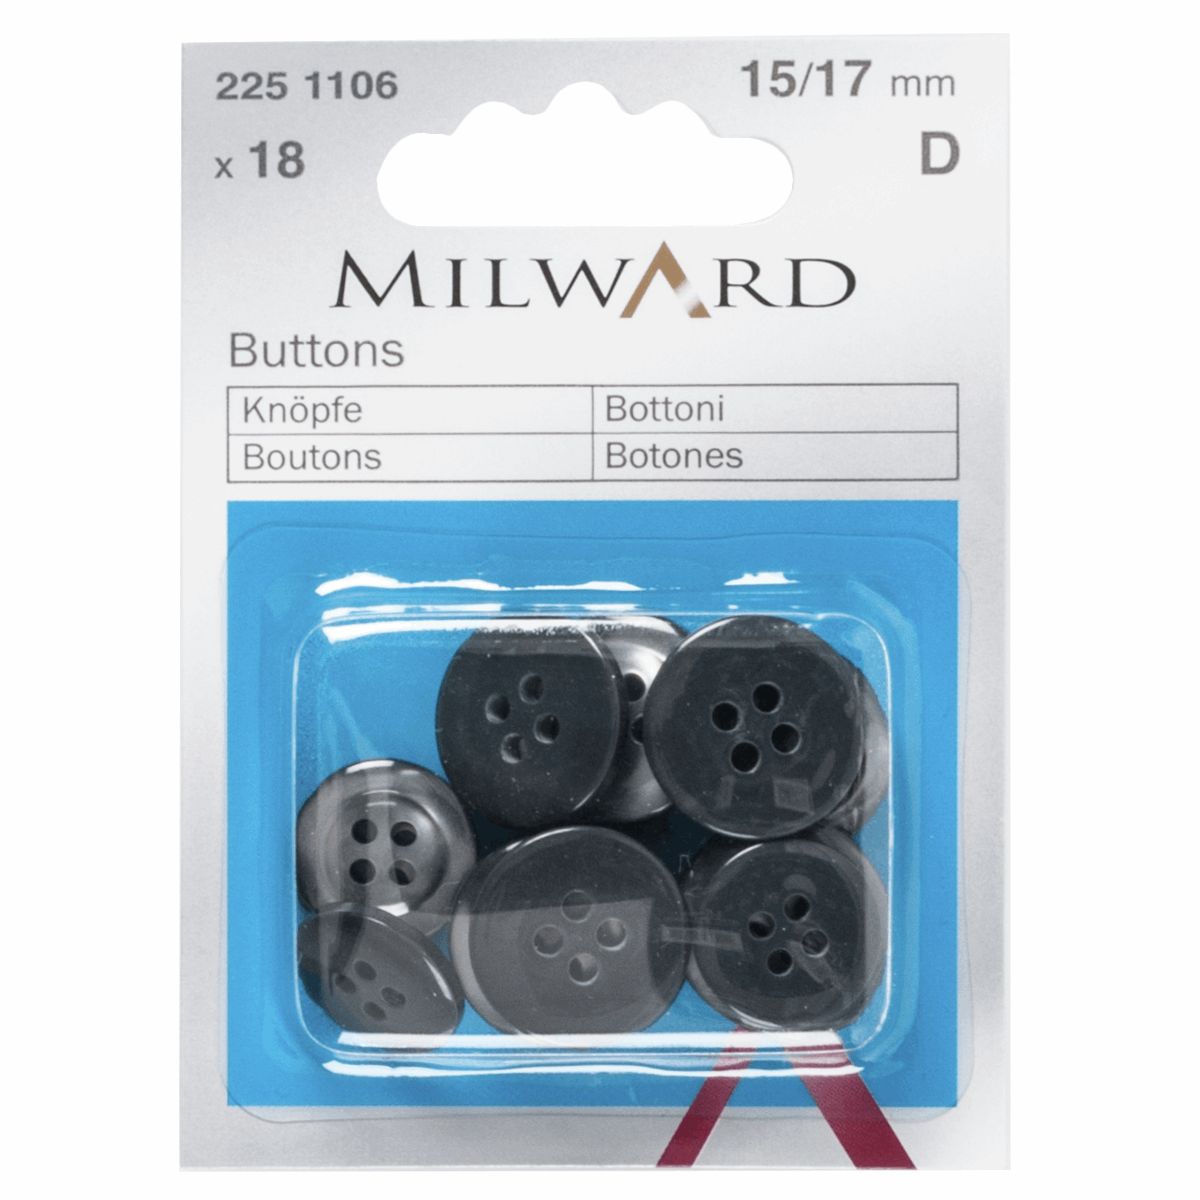 Milward - Trouser Buttons 15/17 mm pack of 18